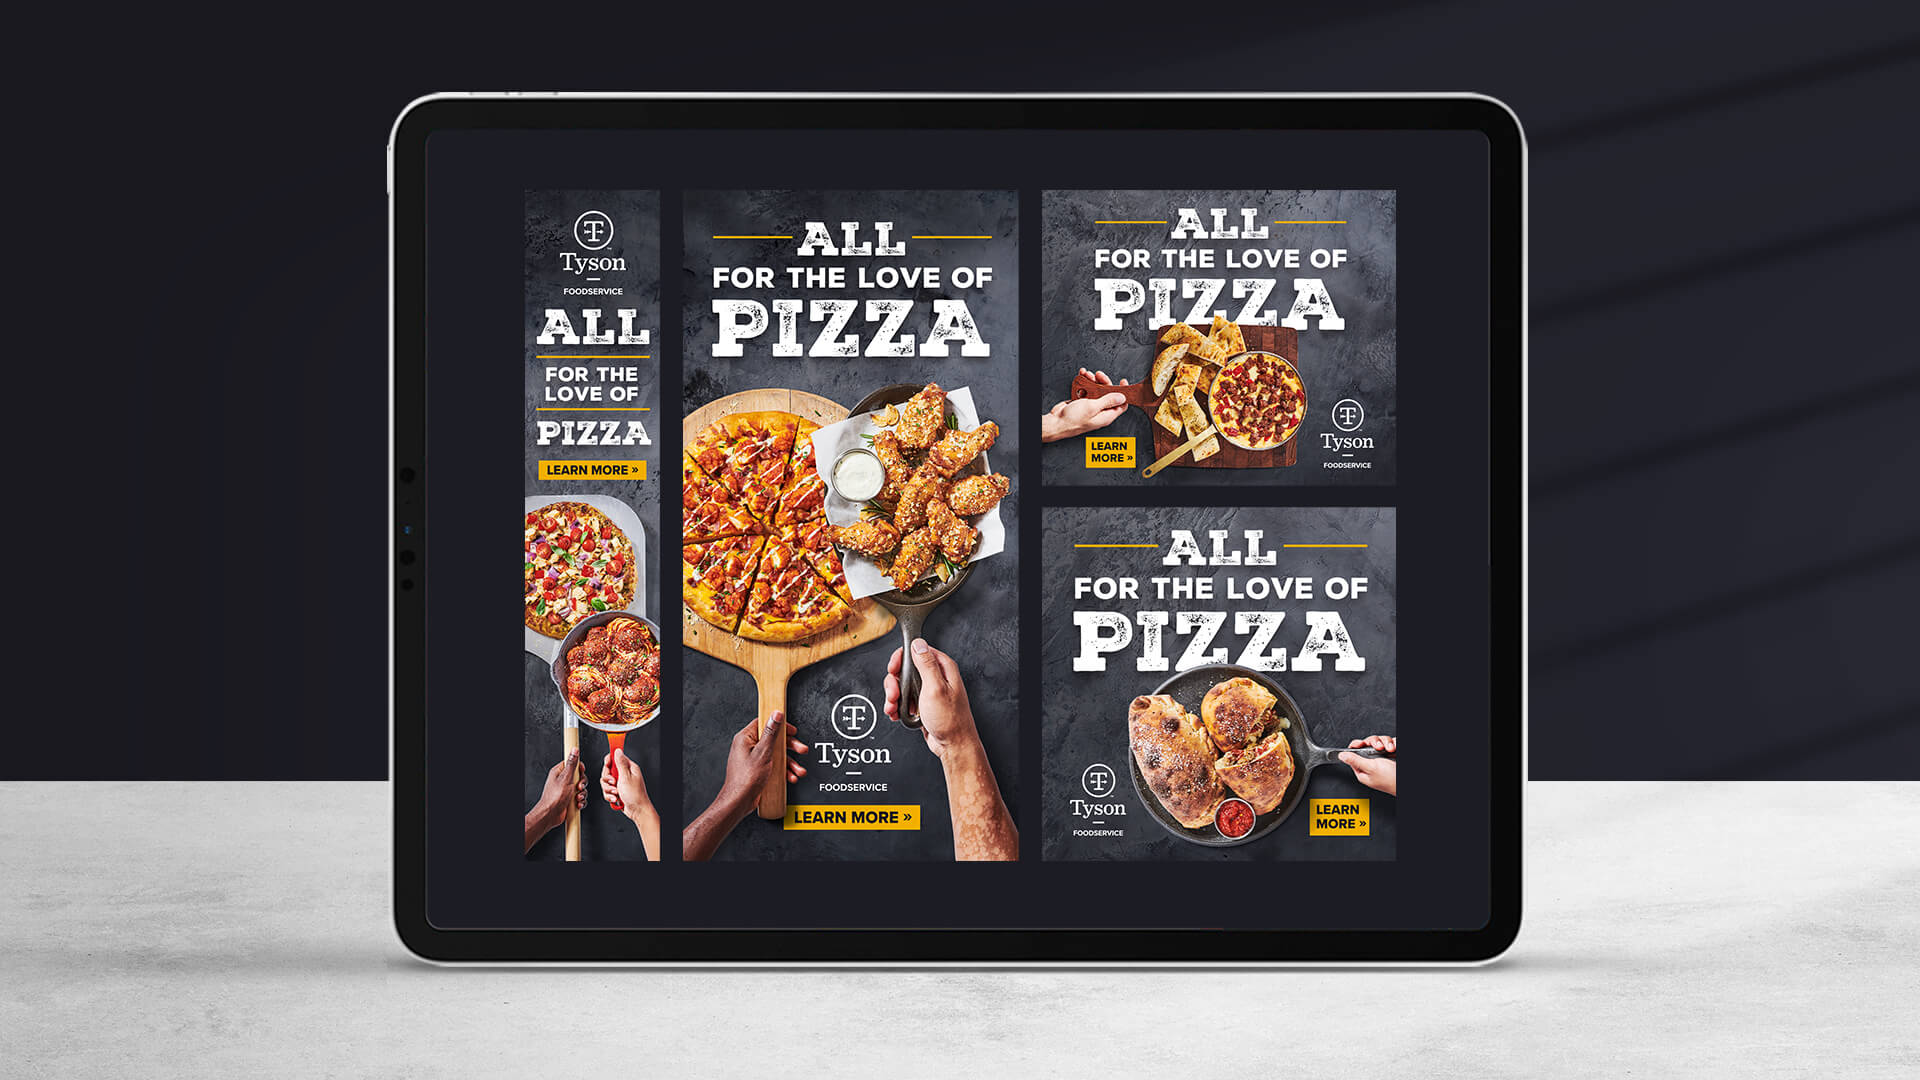 Pizza SLP digital ads on an ipad screen. Headlines read "All for the love of pizza."